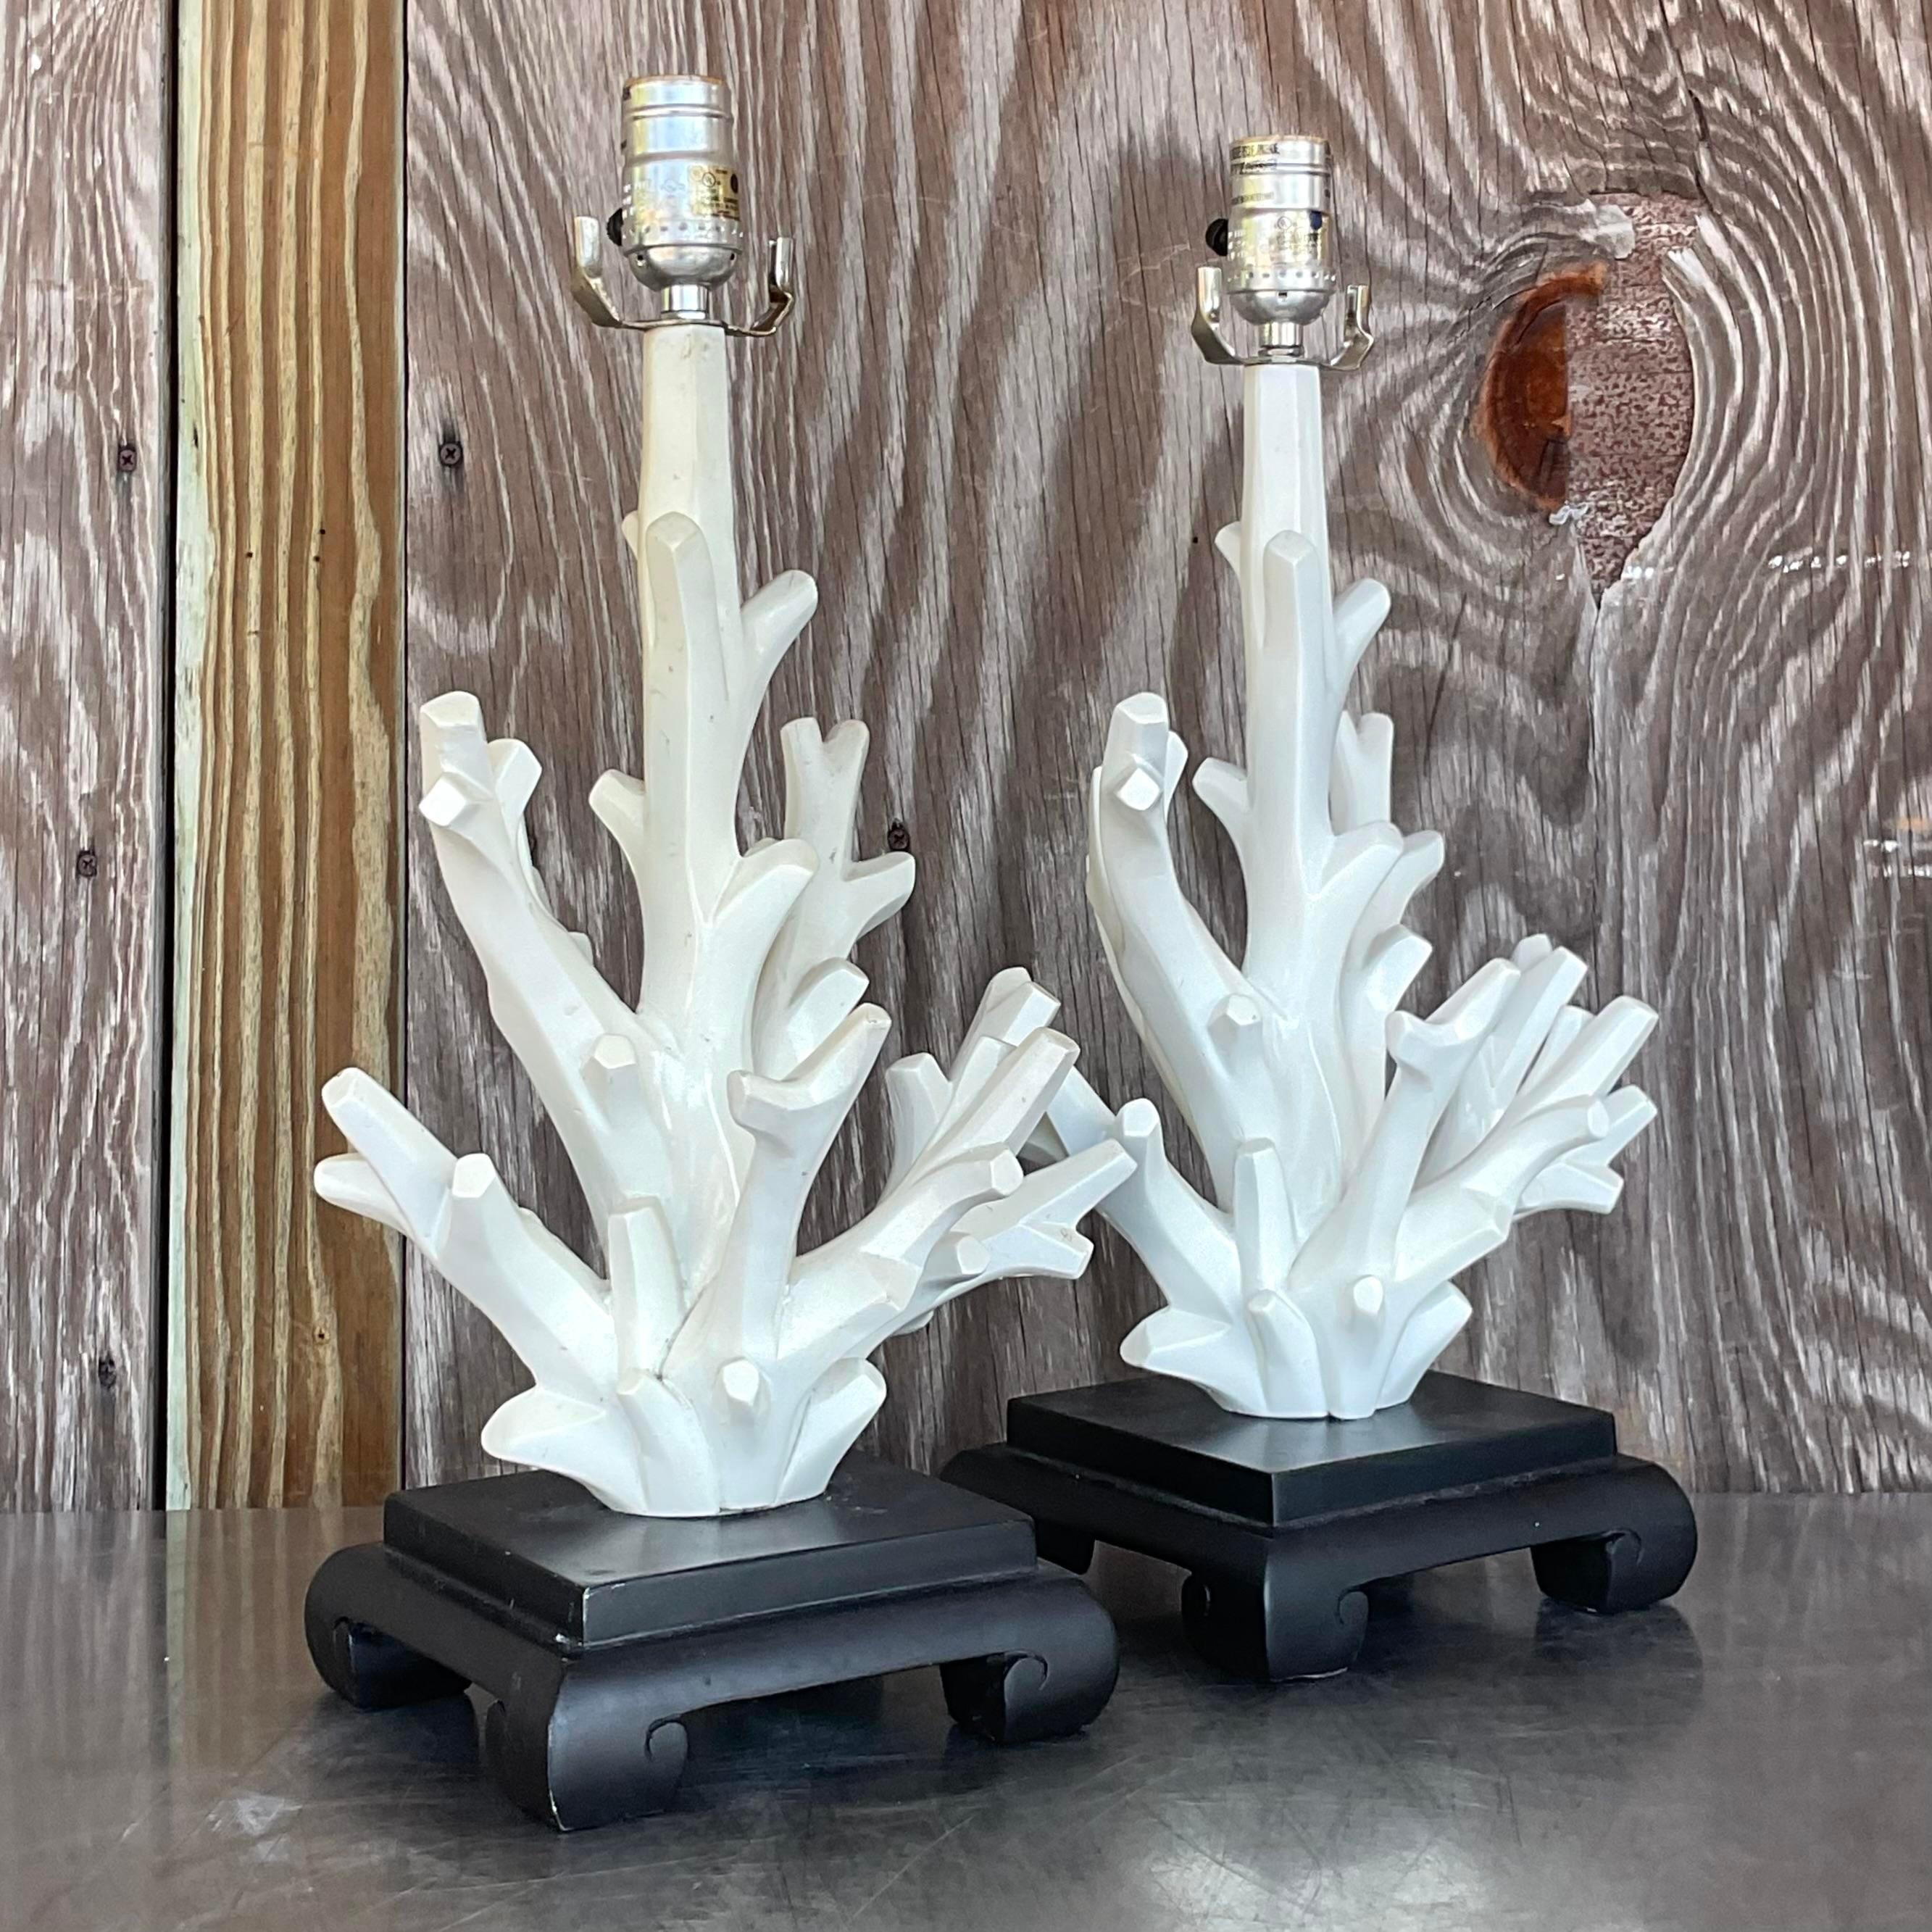 Illuminate your space with coastal elegance using our Vintage Coastal Coral Branch Wood Lamps - A Pair. These beautifully crafted lamps feature natural coral branch designs on rustic wood bases, blending seaside charm with classic American